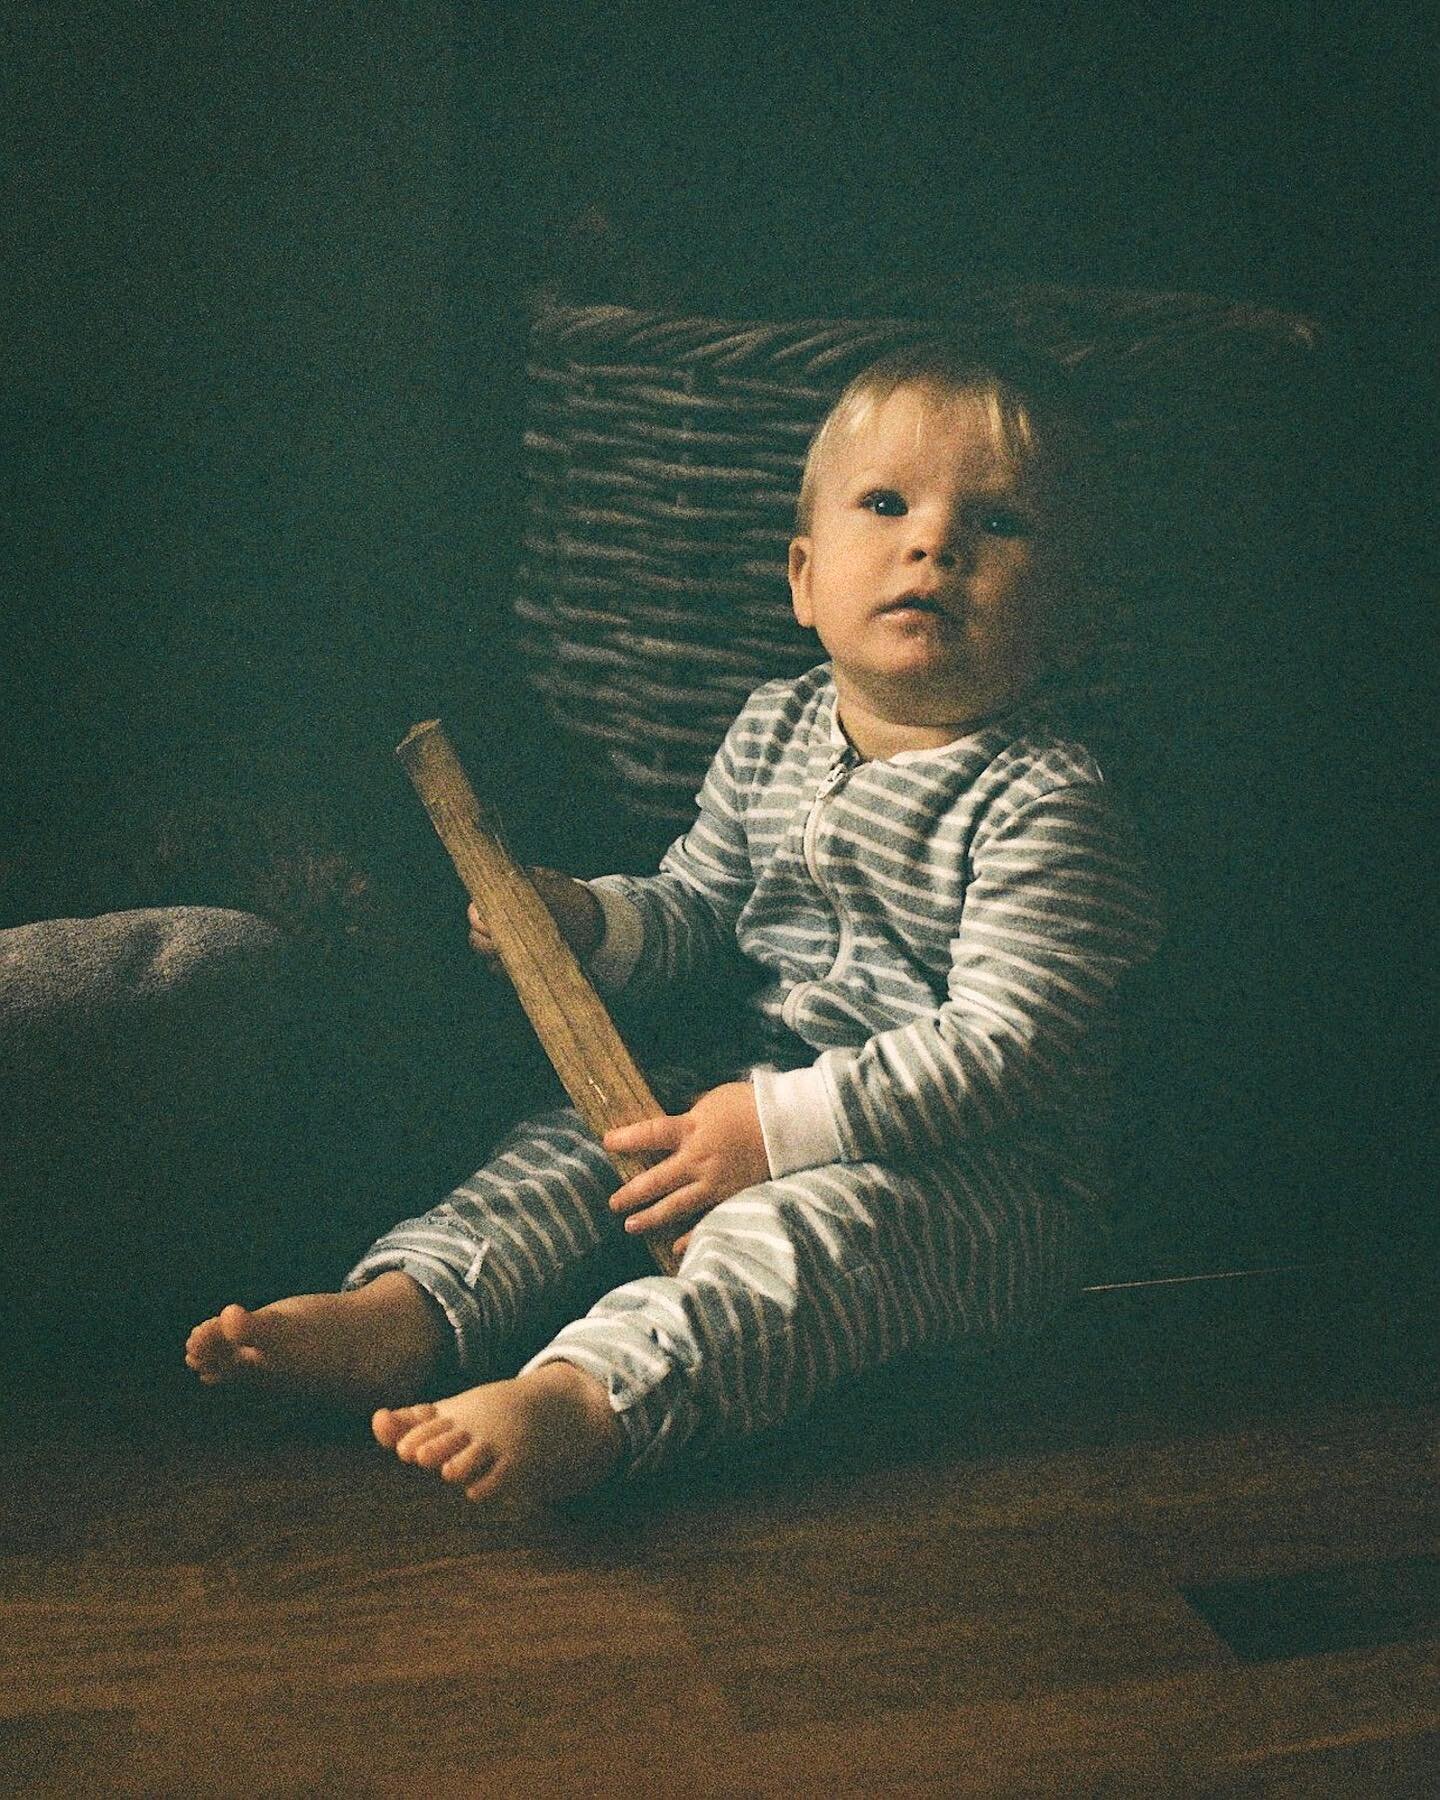 sorting firewood in his pjs 🍂 shot on an old Canon film camera 🎞️ 

#35mm #filmphotography #canon #analogphotography #babyg #shootfilm #norgesfotografer #utno #visitnorway #goodolddays